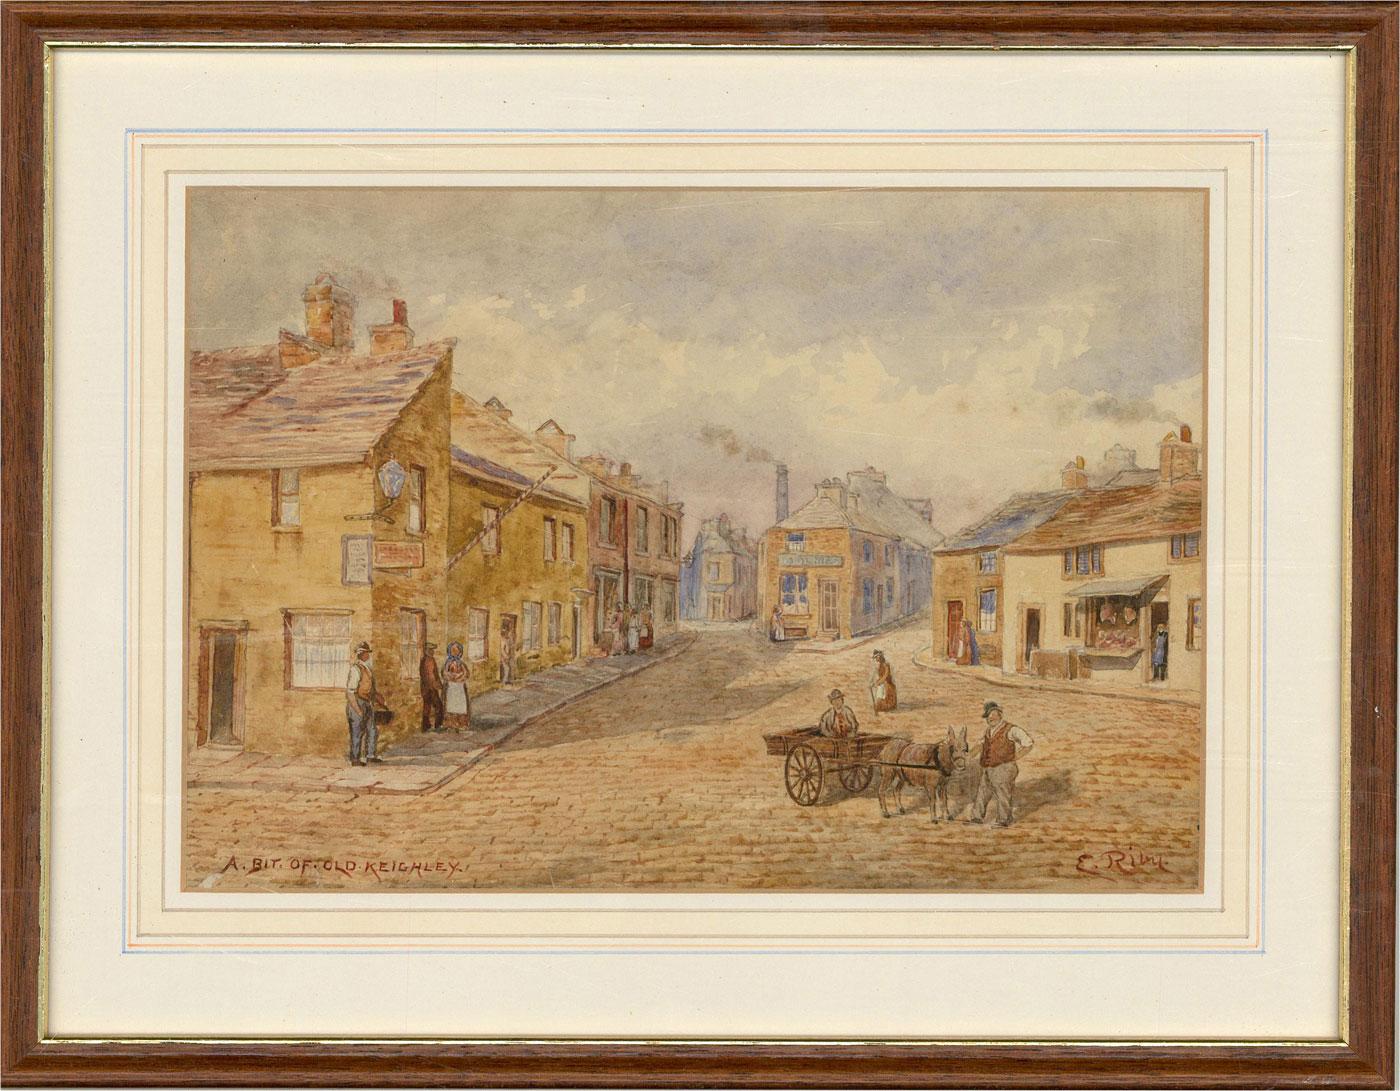 A pretty watercolour scene showing a view of the main street in Keighley pre 1890. The artist has signed illegibly to the lower right corner.

The painting has been presented in a thin wood frame with a gilt inner window, glazing and a wash-line